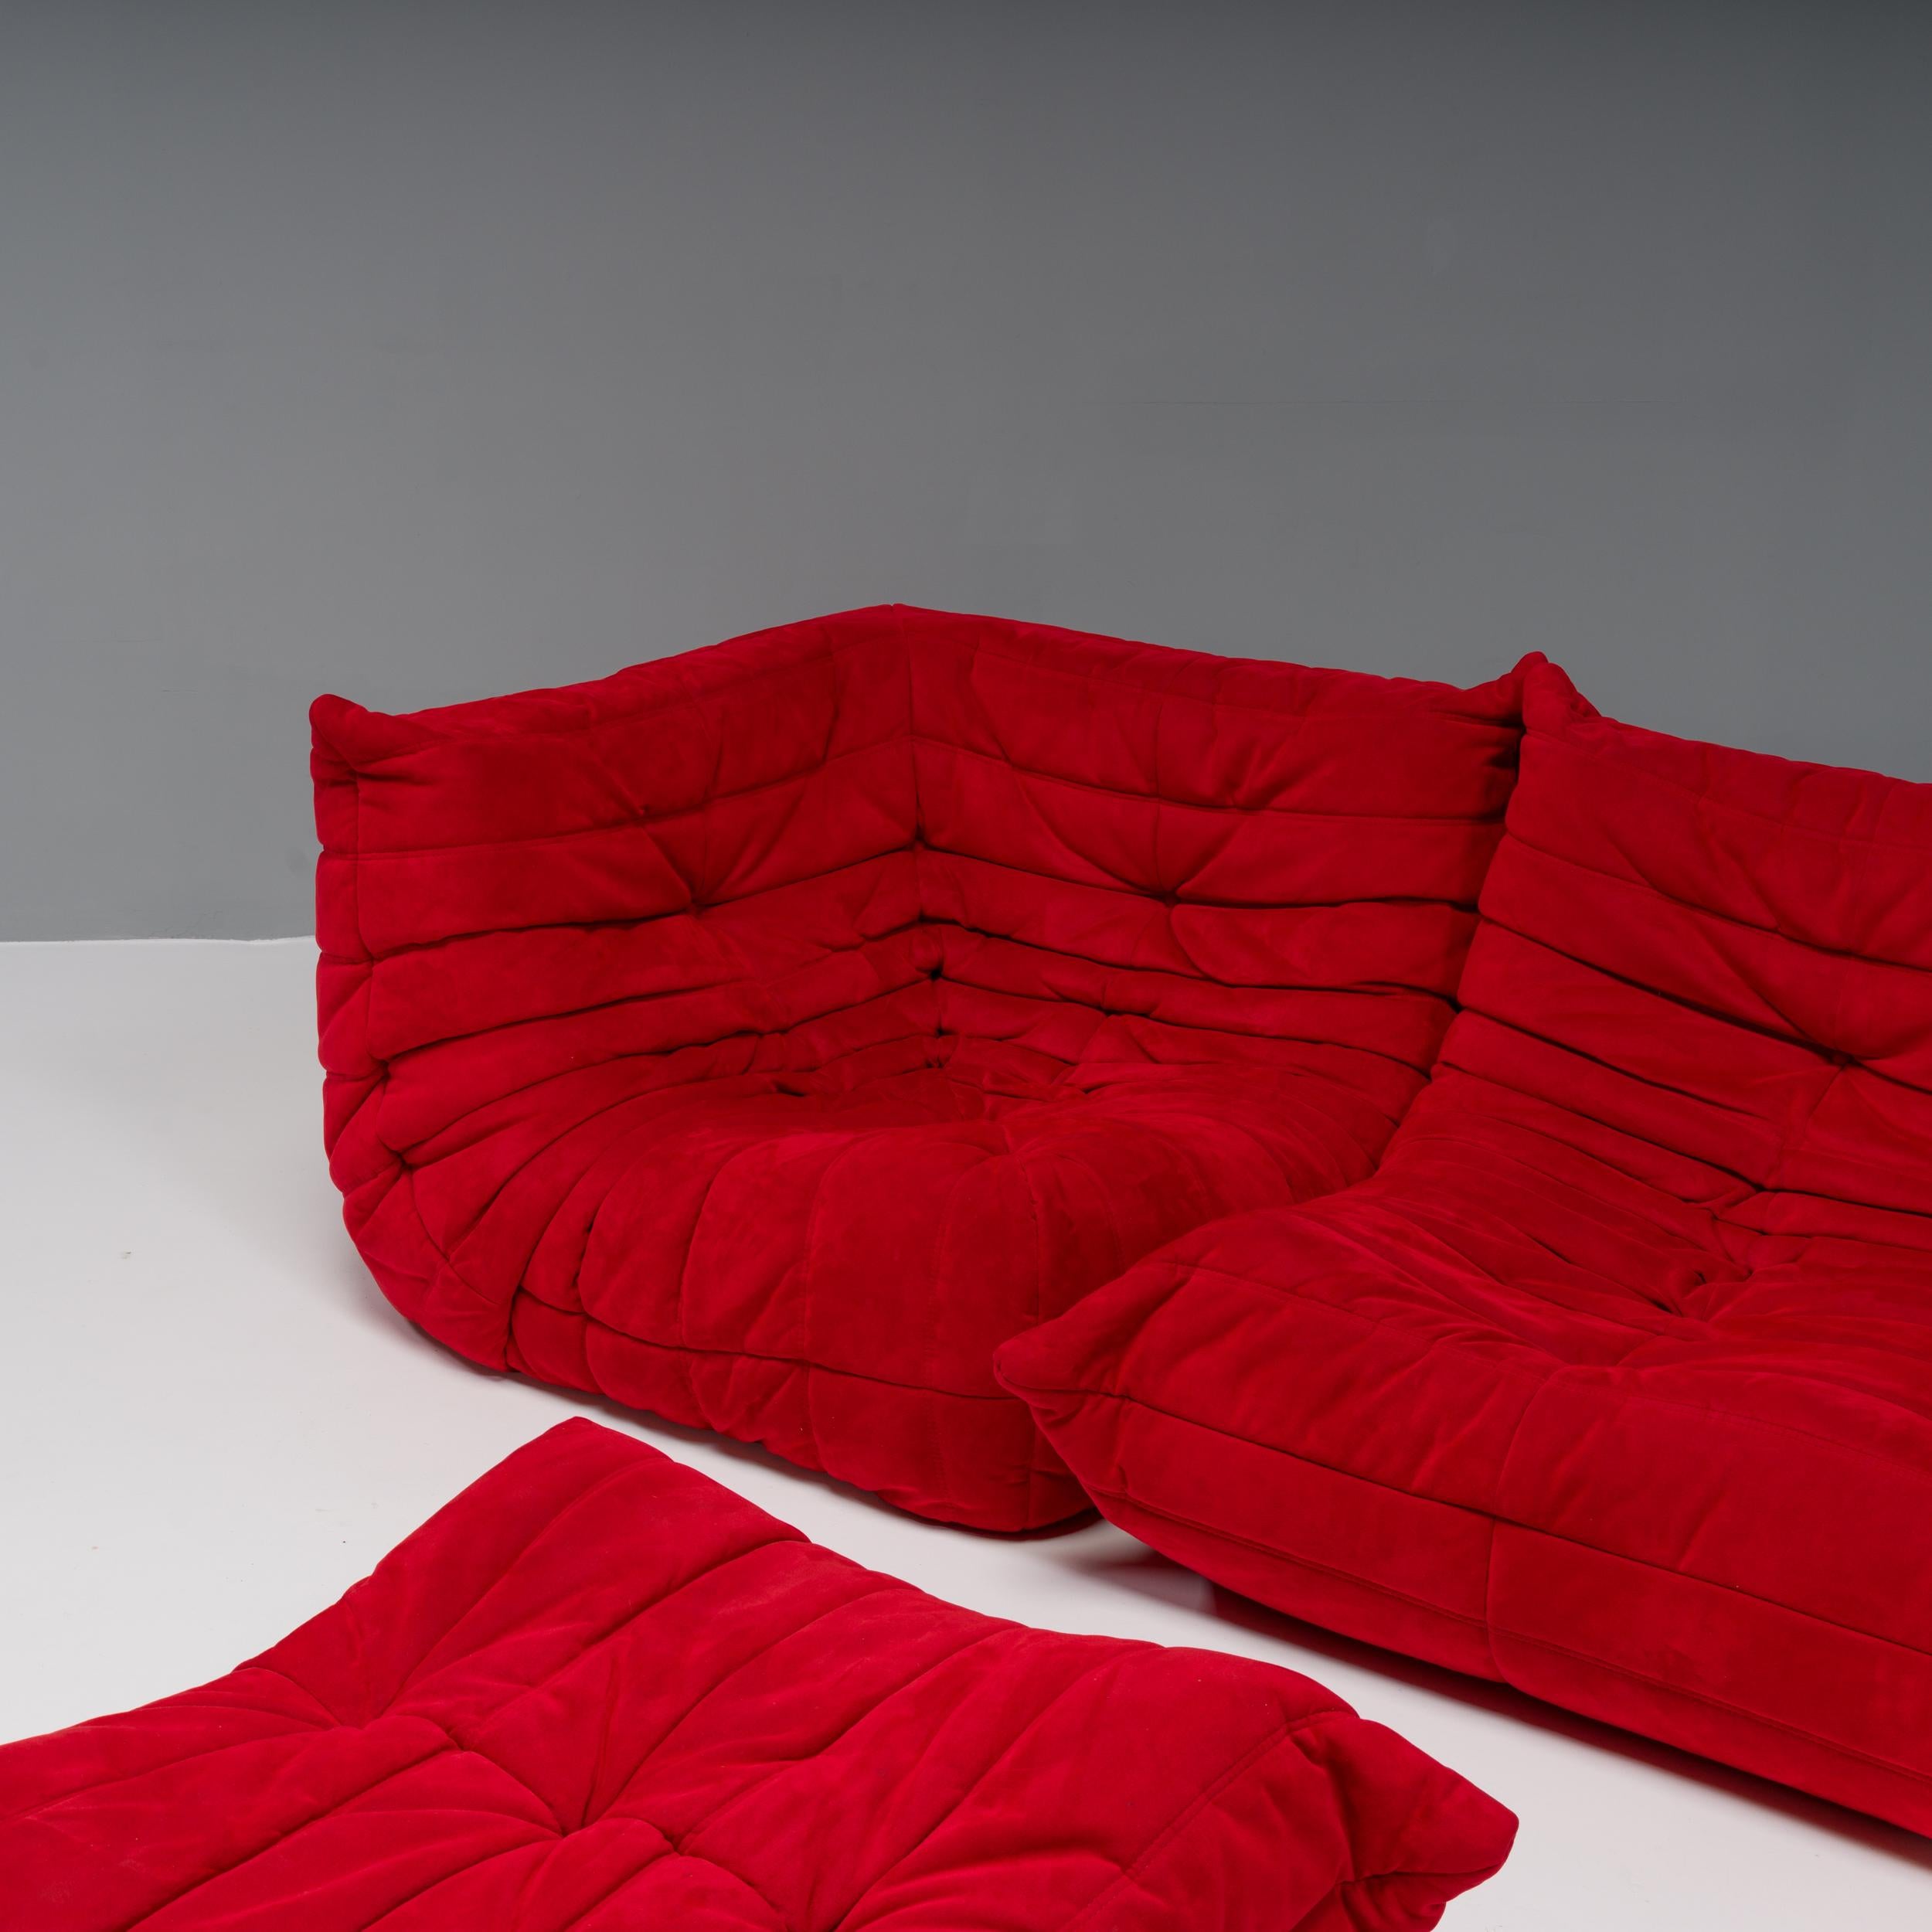 The iconic Togo sofa, originally designed by Michel Ducaroy for Ligne Roset in 1973 has become a design Classic.

This four-piece modular set is incredibly versatile and can be configured into one large corner sofa with a footstool or split for a